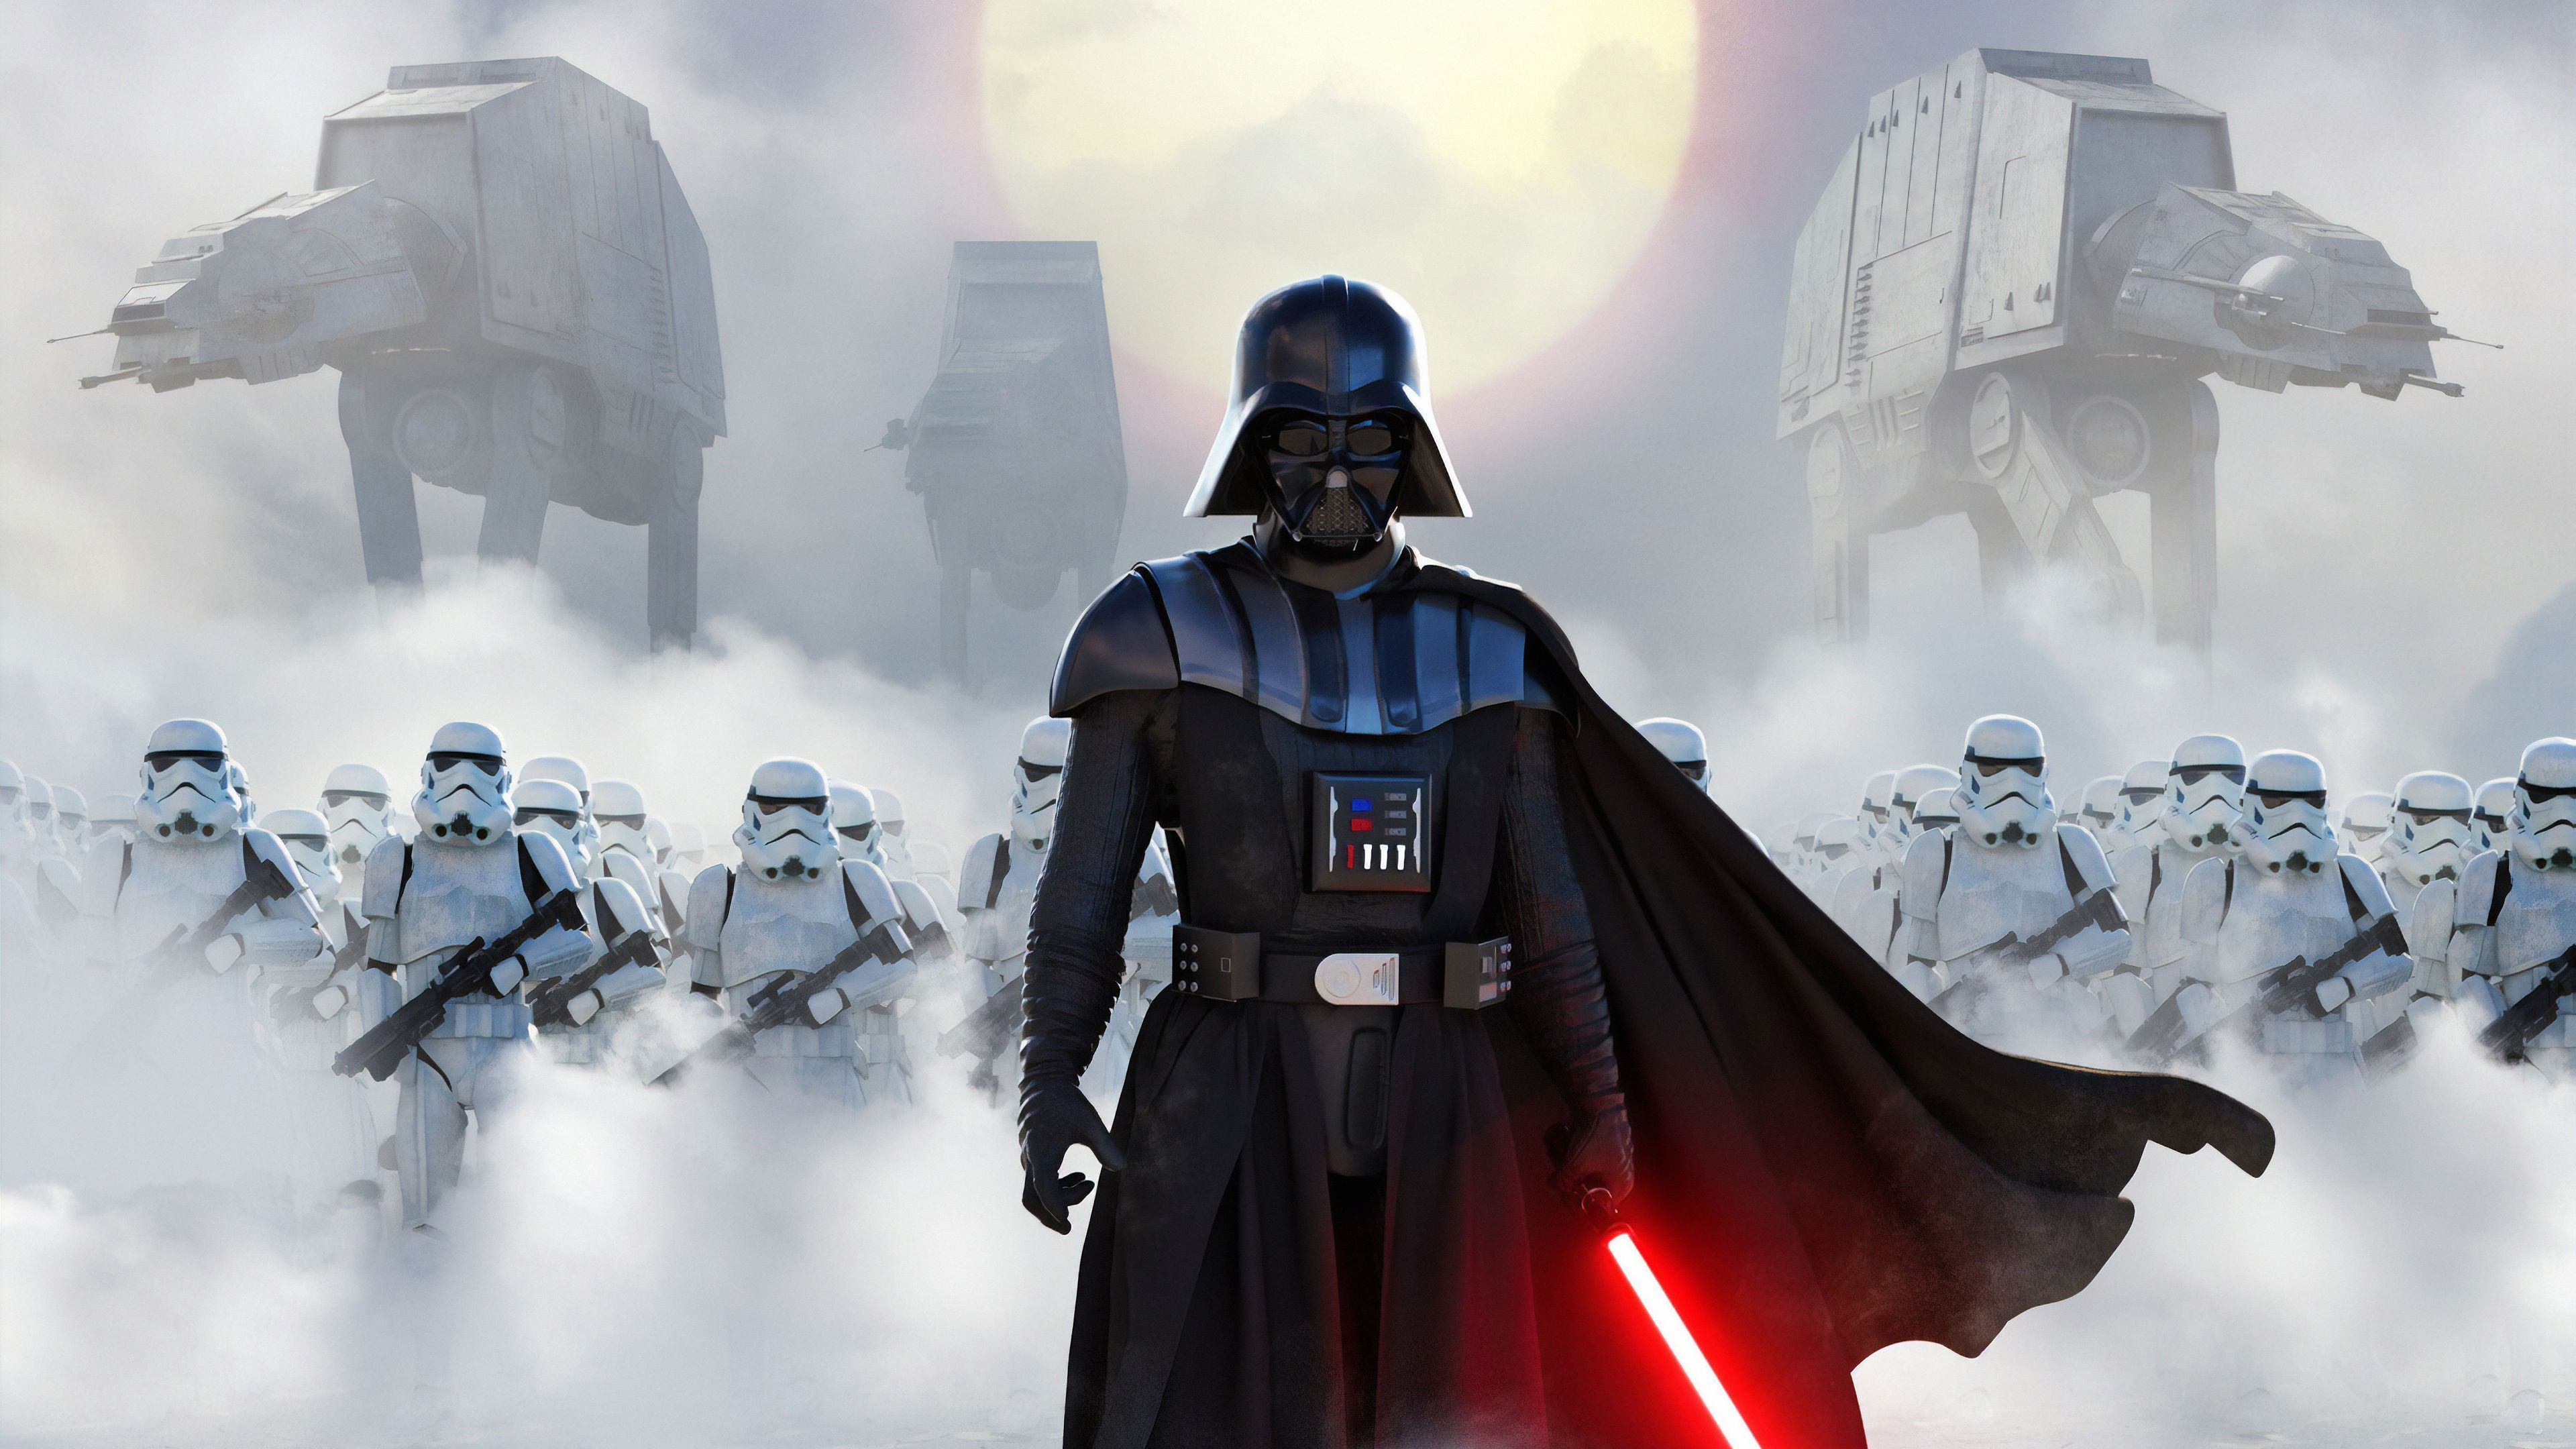 Darth Vader Wallpaper for mobile phone, tablet, desktop computer and other devices HD and 4K wallpap. Darth vader wallpaper, Darth vader 4k wallpaper, Darth vader